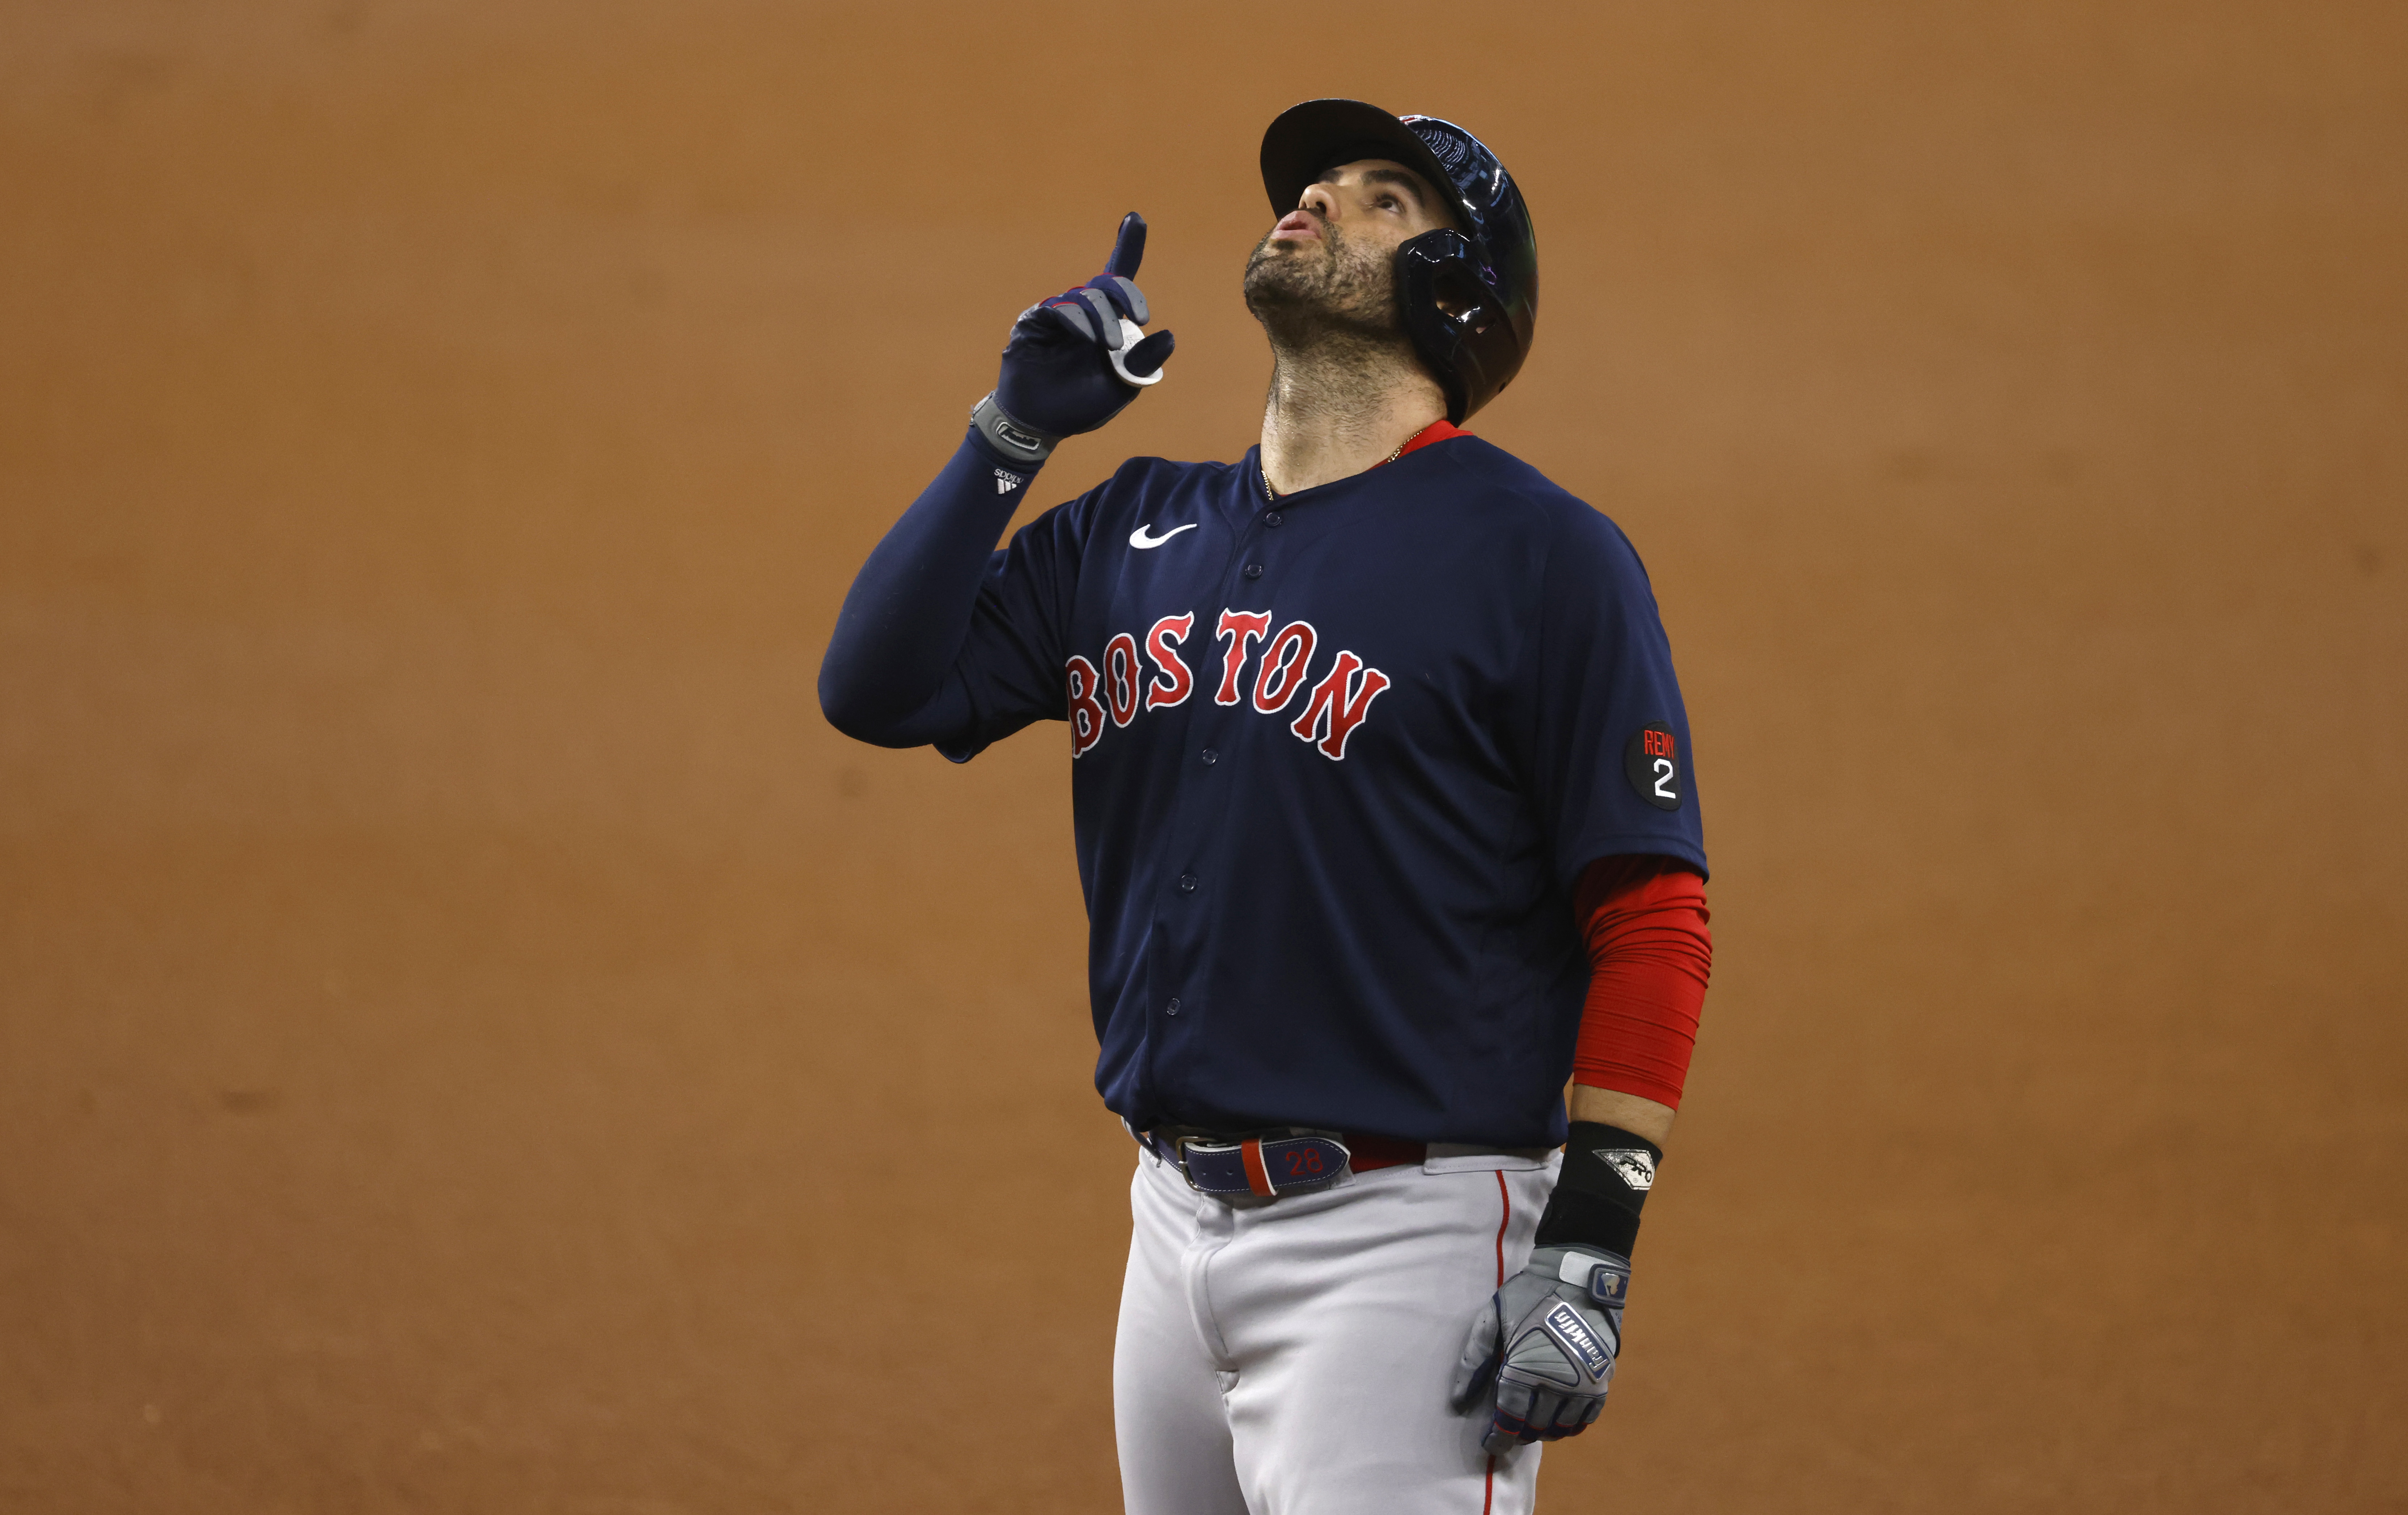 J.D. Martinez discussed his time with the Red Sox, thoughts on his future